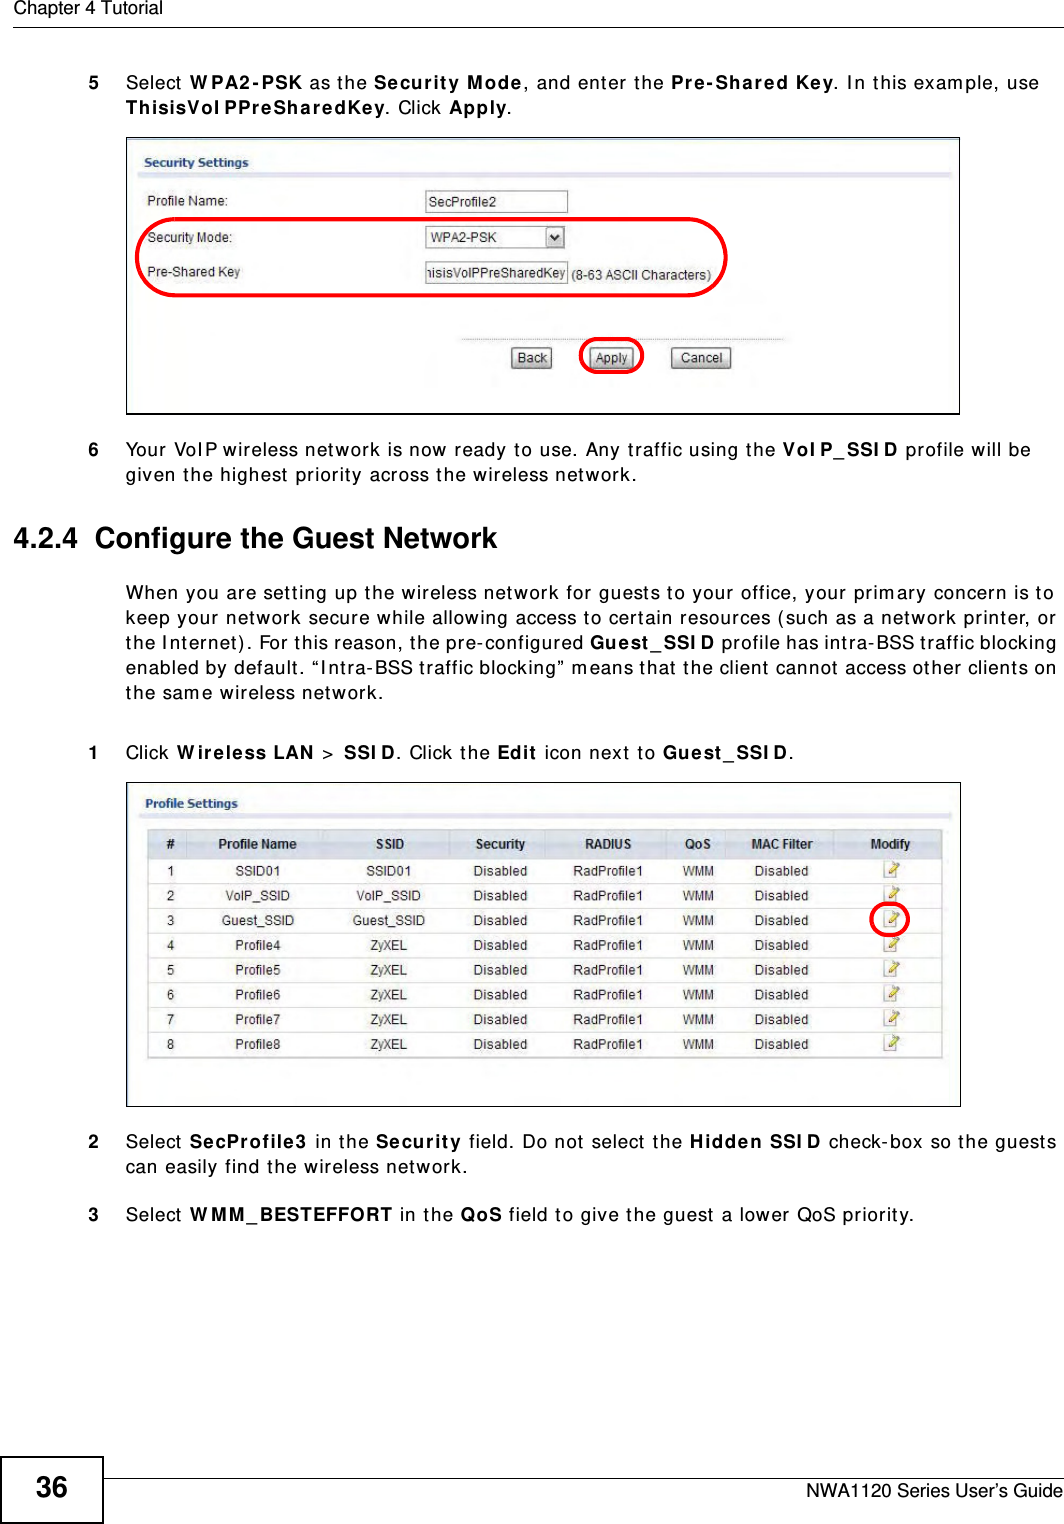 Chapter 4 TutorialNWA1120 Series User’s Guide365Select WPA2-PSK as the Security Mode, and enter the Pre-Shared Key. In this example, use ThisisVoIPPreSharedKey. Click Apply. 6Your VoIP wireless network is now ready to use. Any traffic using the VoIP_SSID profile will be given the highest priority across the wireless network.4.2.4  Configure the Guest NetworkWhen you are setting up the wireless network for guests to your office, your primary concern is to keep your network secure while allowing access to certain resources (such as a network printer, or the Internet). For this reason, the pre-configured Guest_SSID profile has intra-BSS traffic blocking enabled by default. “Intra-BSS traffic blocking” means that the client cannot access other clients on the same wireless network.1Click Wireless LAN &gt; SSID. Click the Edit icon next to Guest_SSID. 2Select SecProfile3 in the Security field. Do not select the Hidden SSID check-box so the guests can easily find the wireless network. 3Select WMM_BESTEFFORT in the QoS field to give the guest a lower QoS priority. 